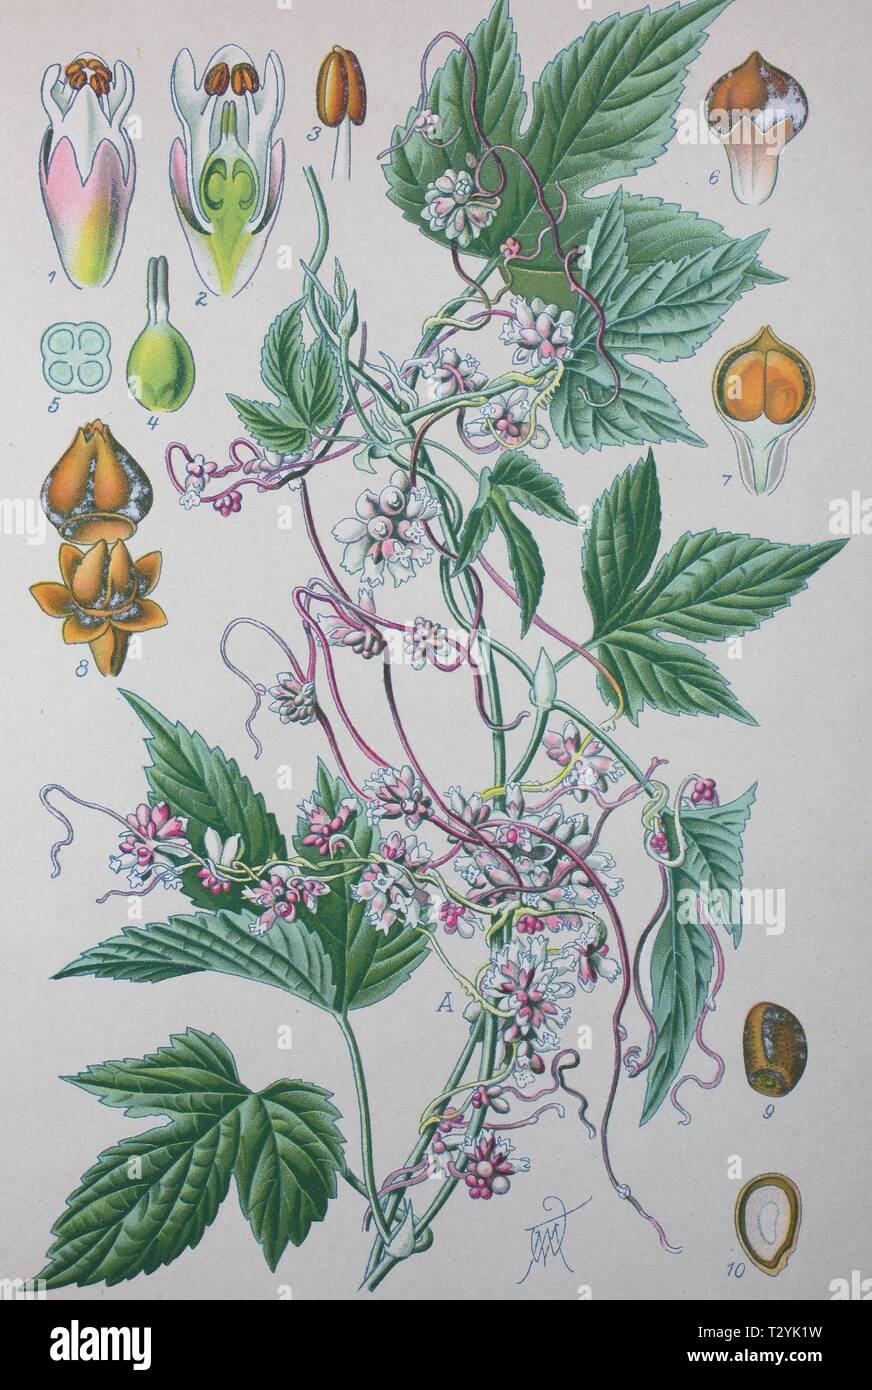 Greater dodder (Cuscuta europaea), historical illustration from 1885, Germany Stock Photo